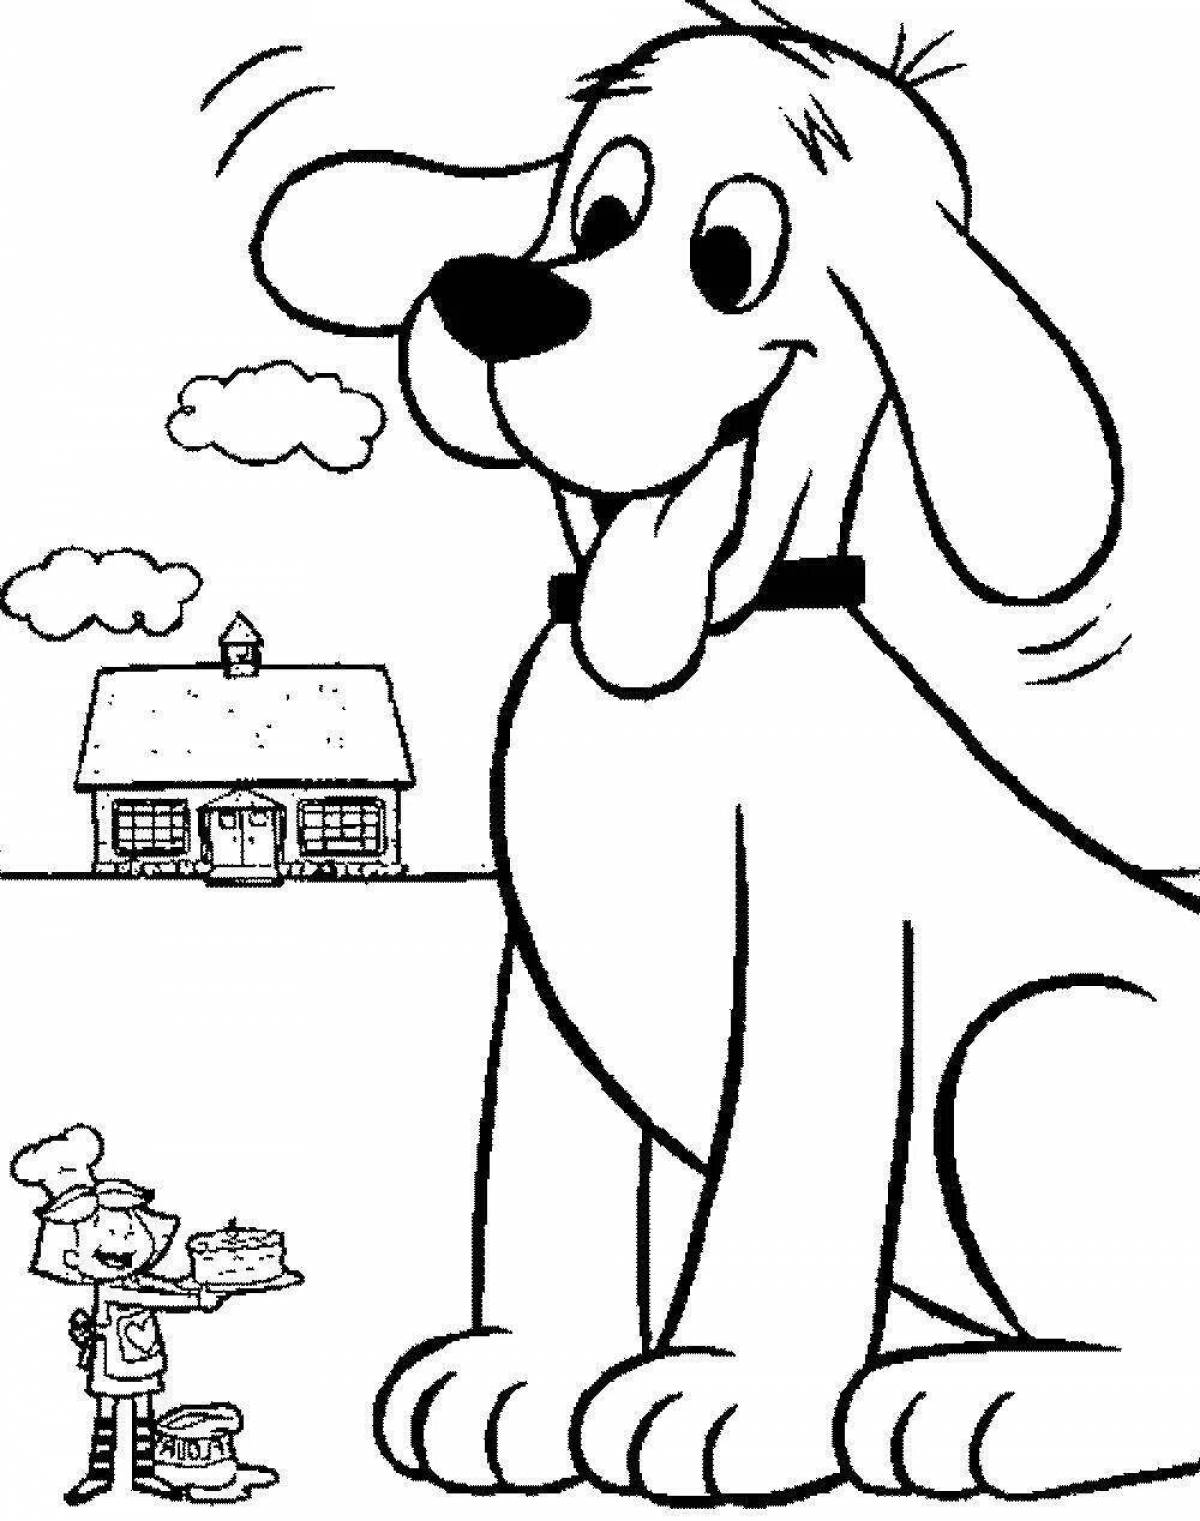 Fun coloring for boys and dogs